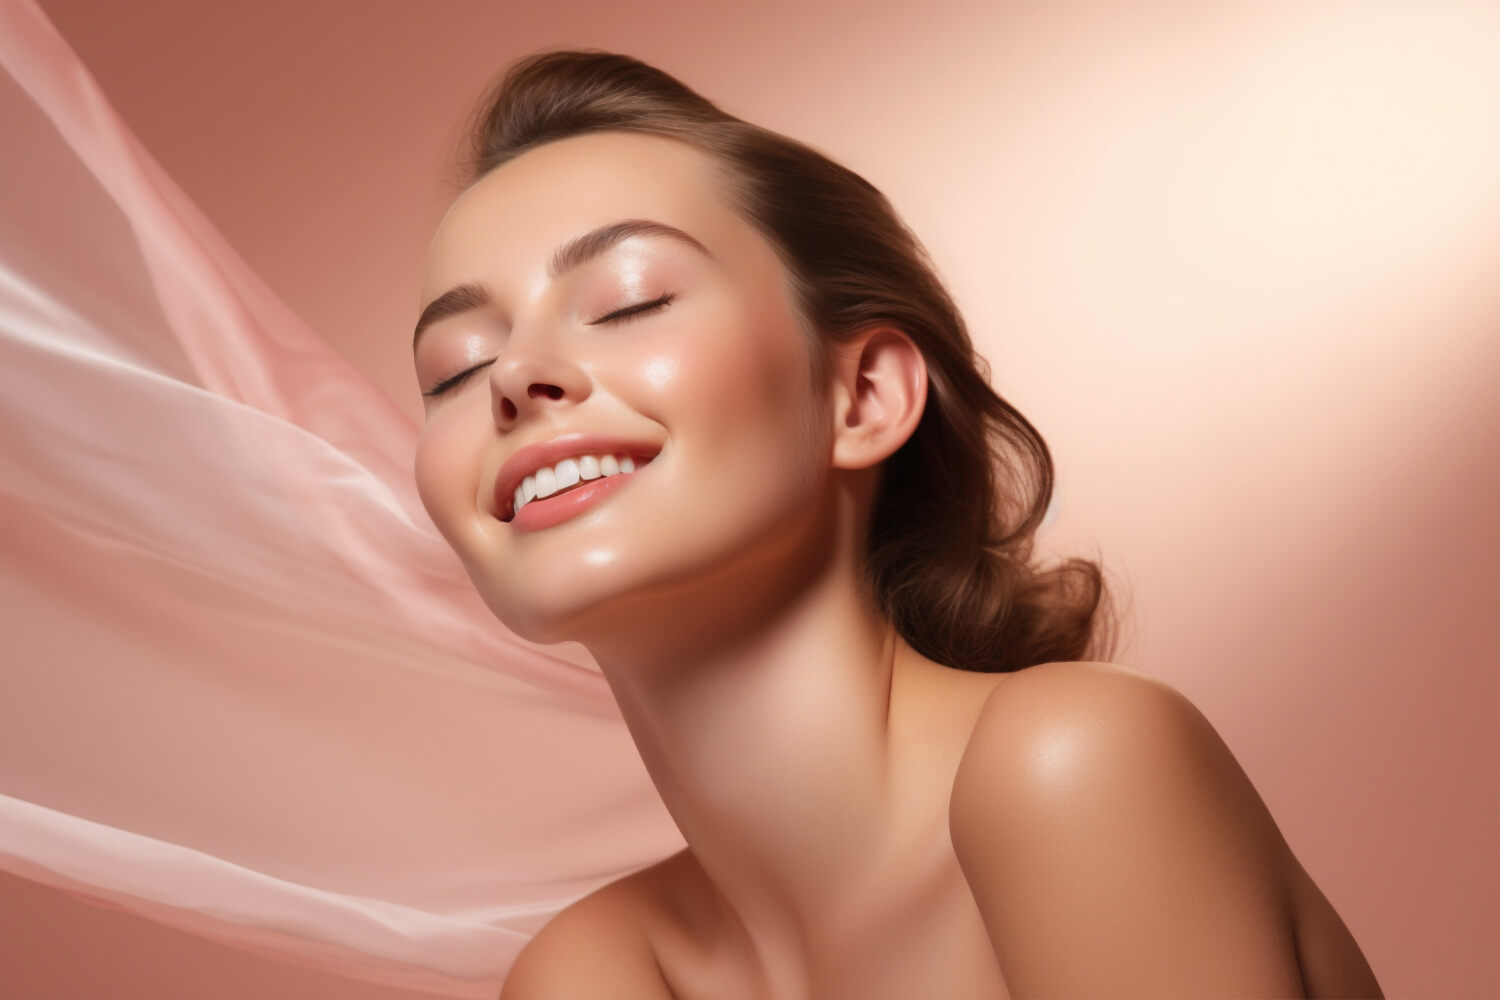 Top secrets and their benefits of achieving a radiant glow through facial treatments